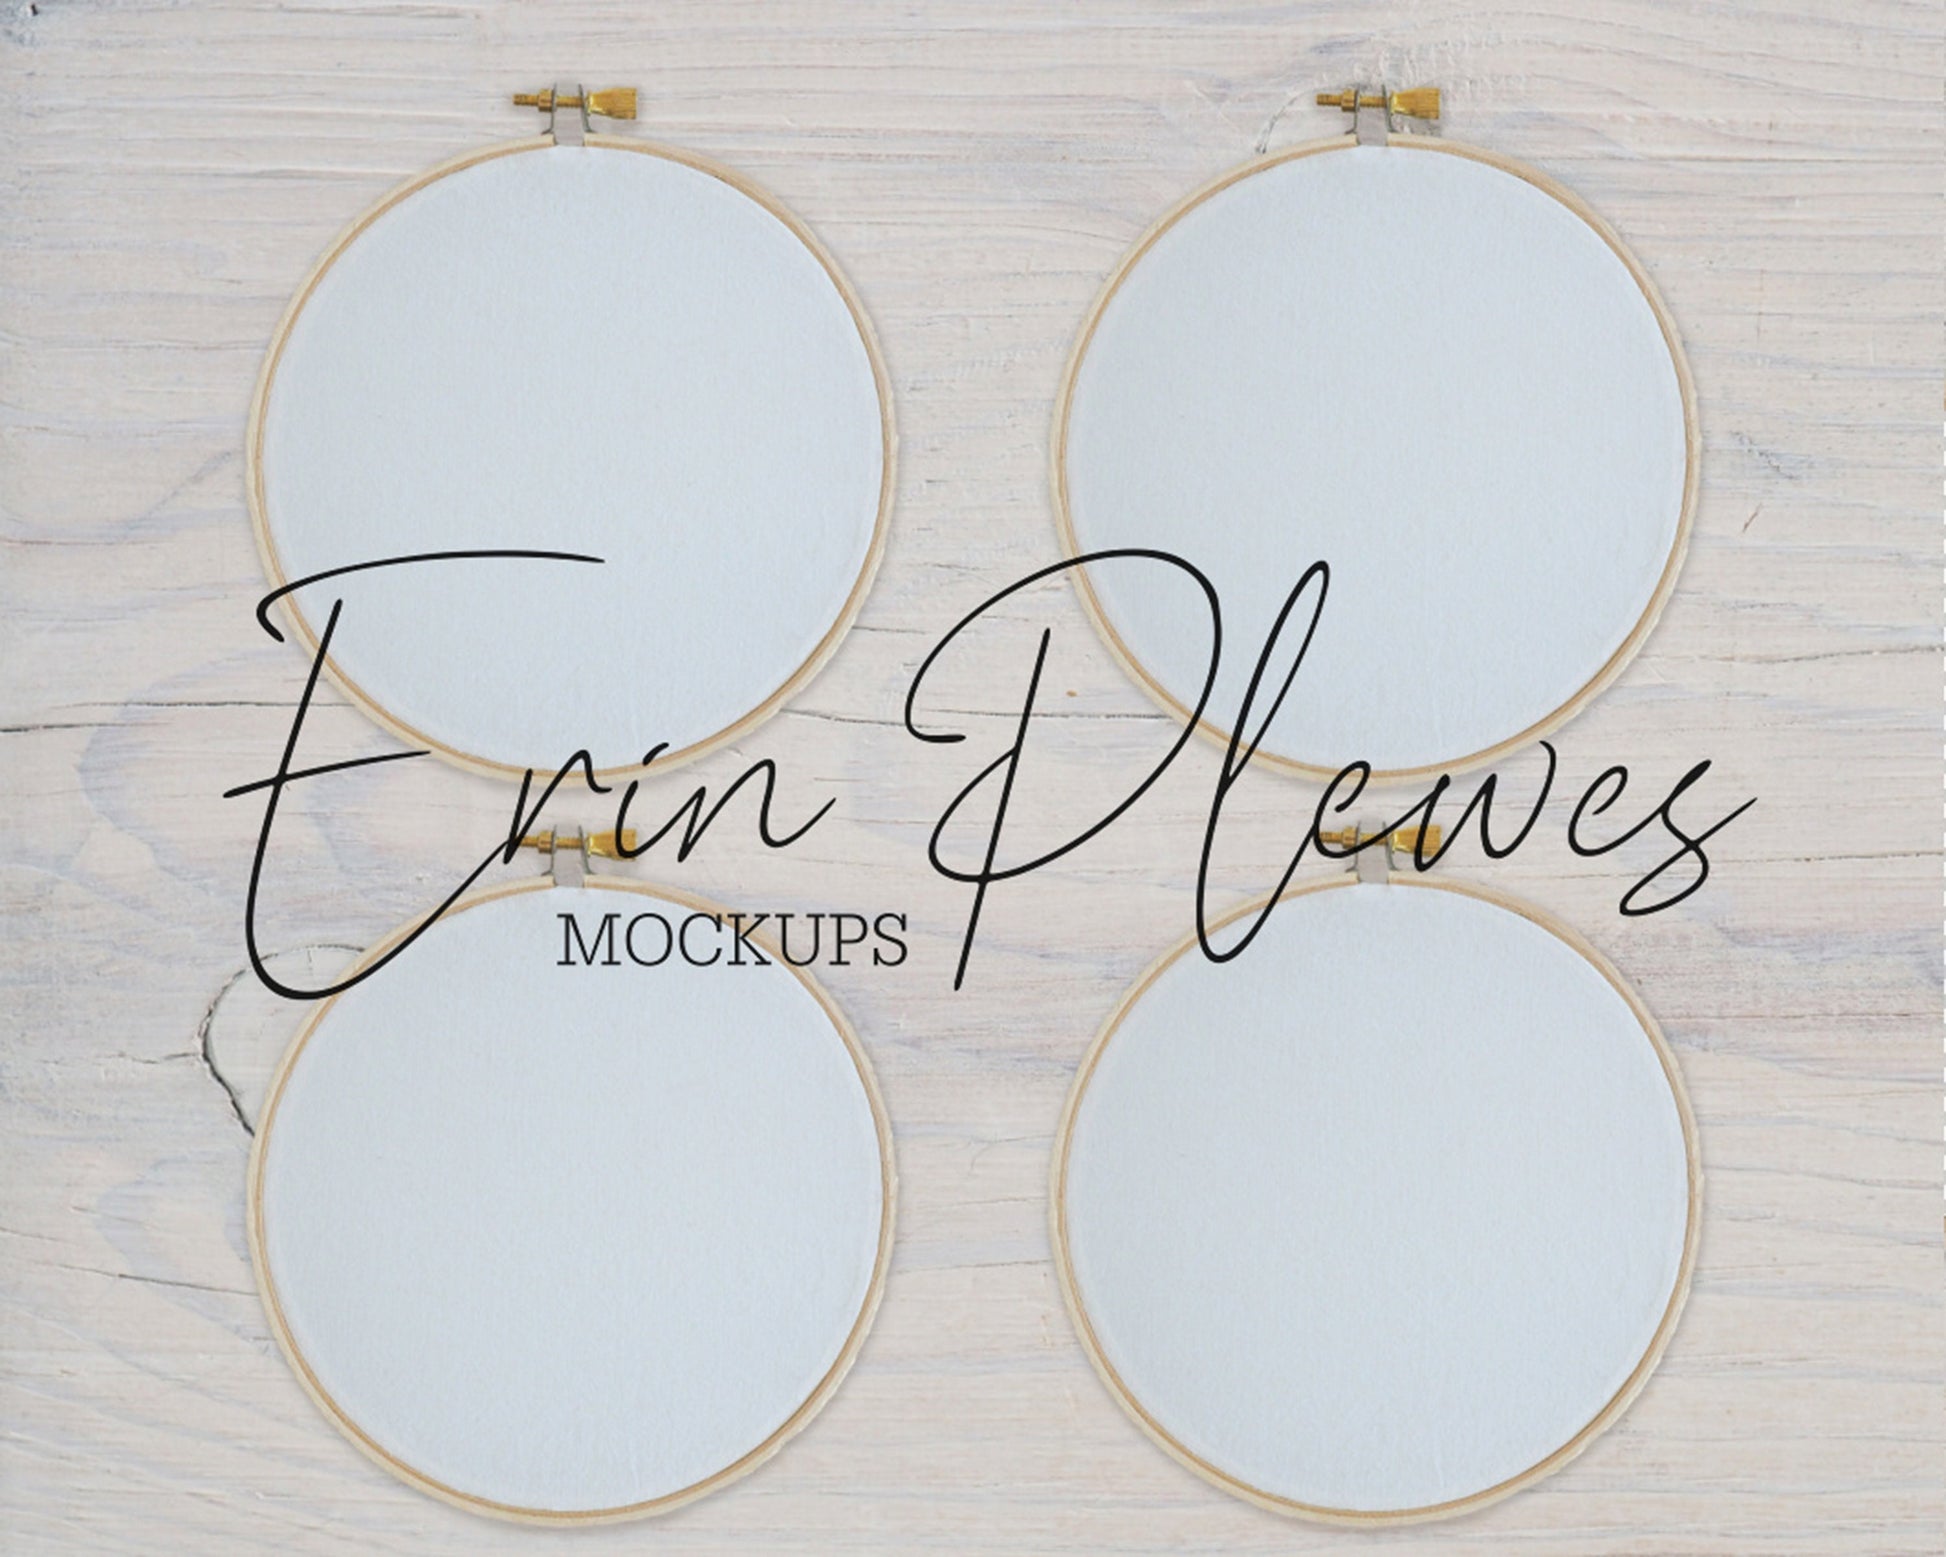 Embroidery Hoop Mockup Set of 4, Cross Stich Mock Up on Rustic White Wood, JPG PNG PSD Smart Object Digital Download Template